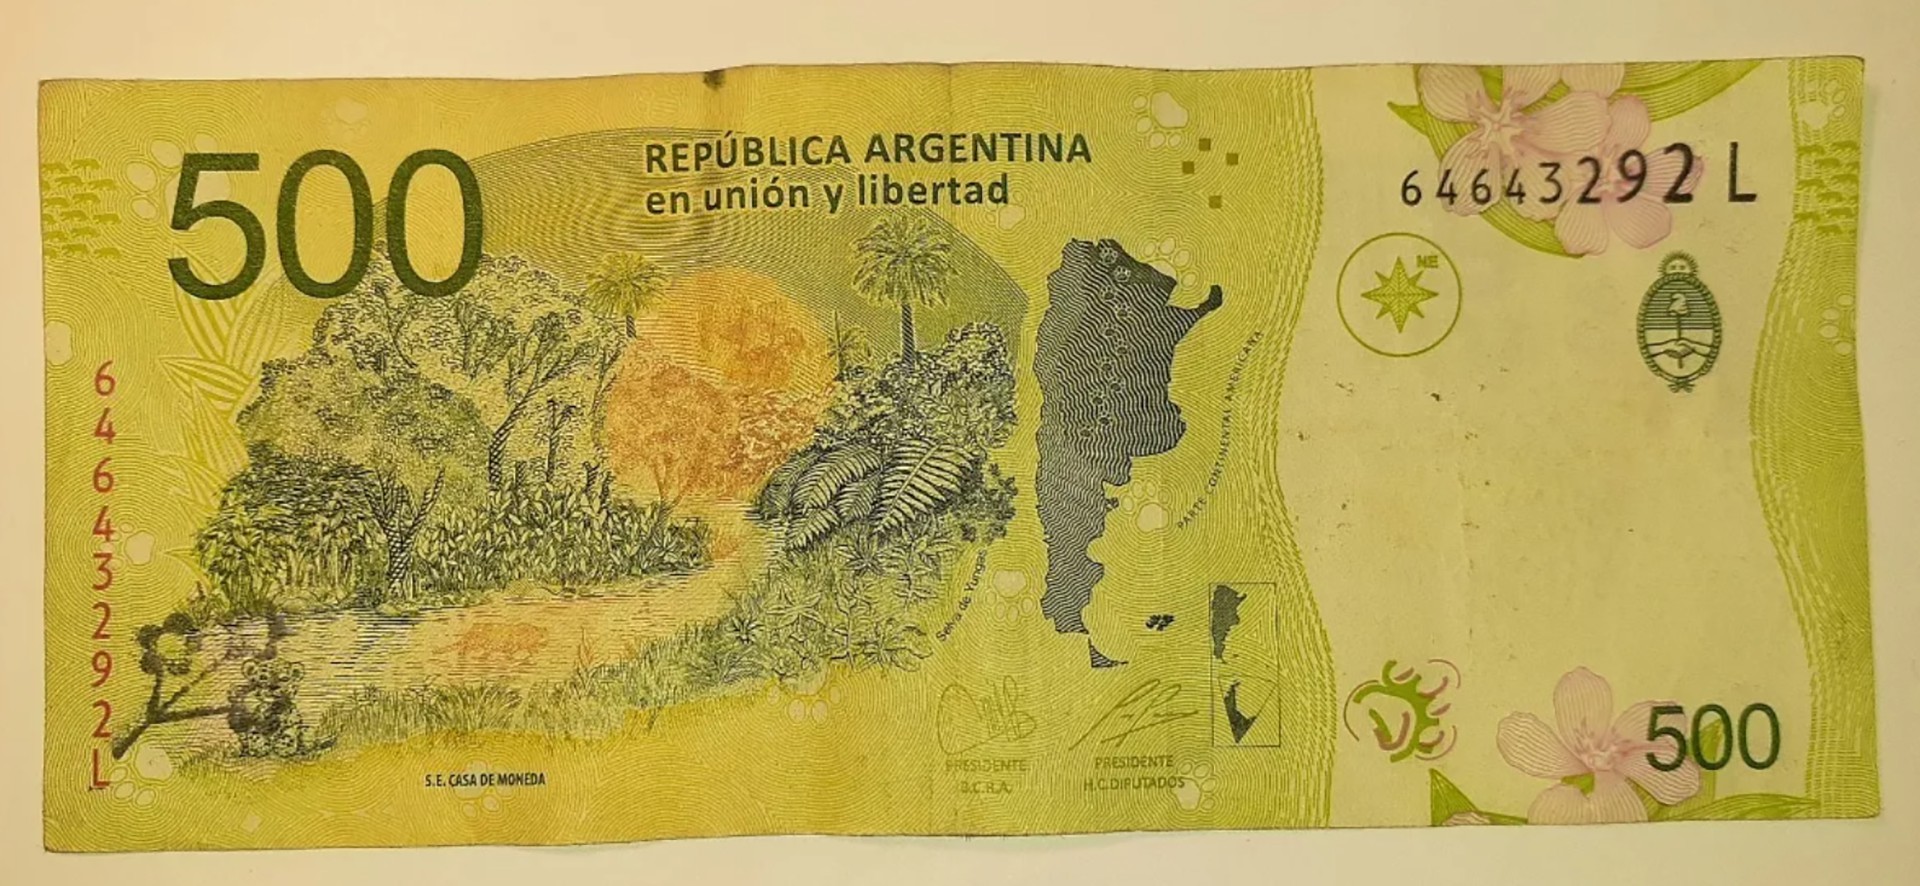 A bill of the $500 edition of the yaguareté has the image of a flower in the lower left frame of the back and is sold for more than 150 thousand pesos on the internet